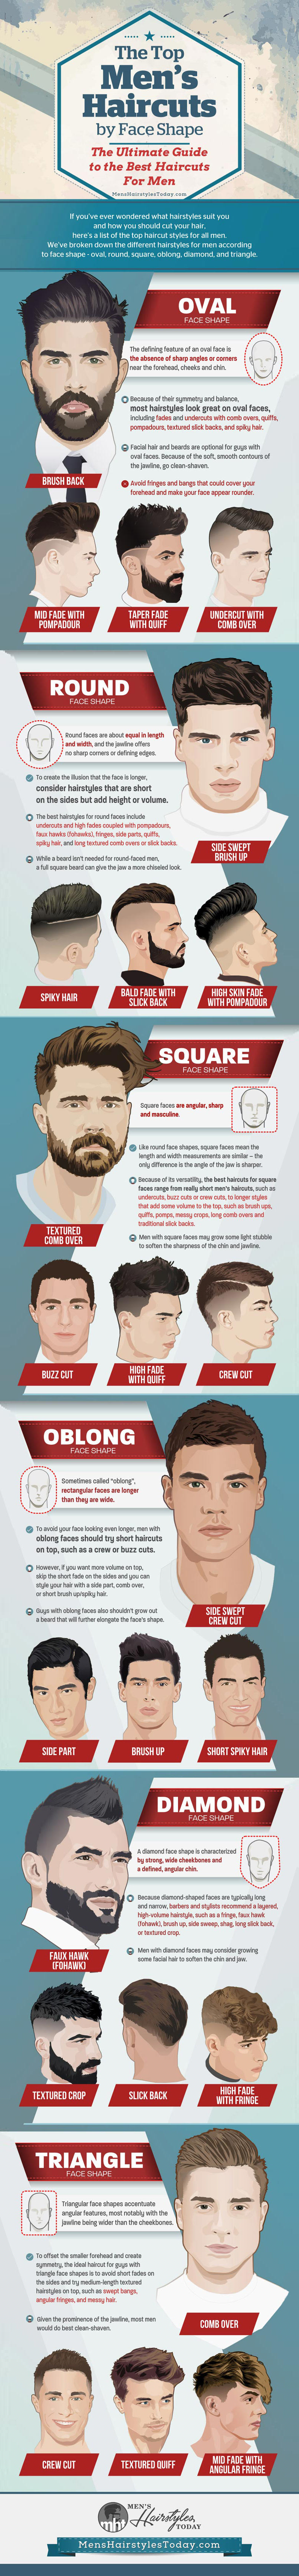 Best Mens Hairstyle According to Face Shape Infographic